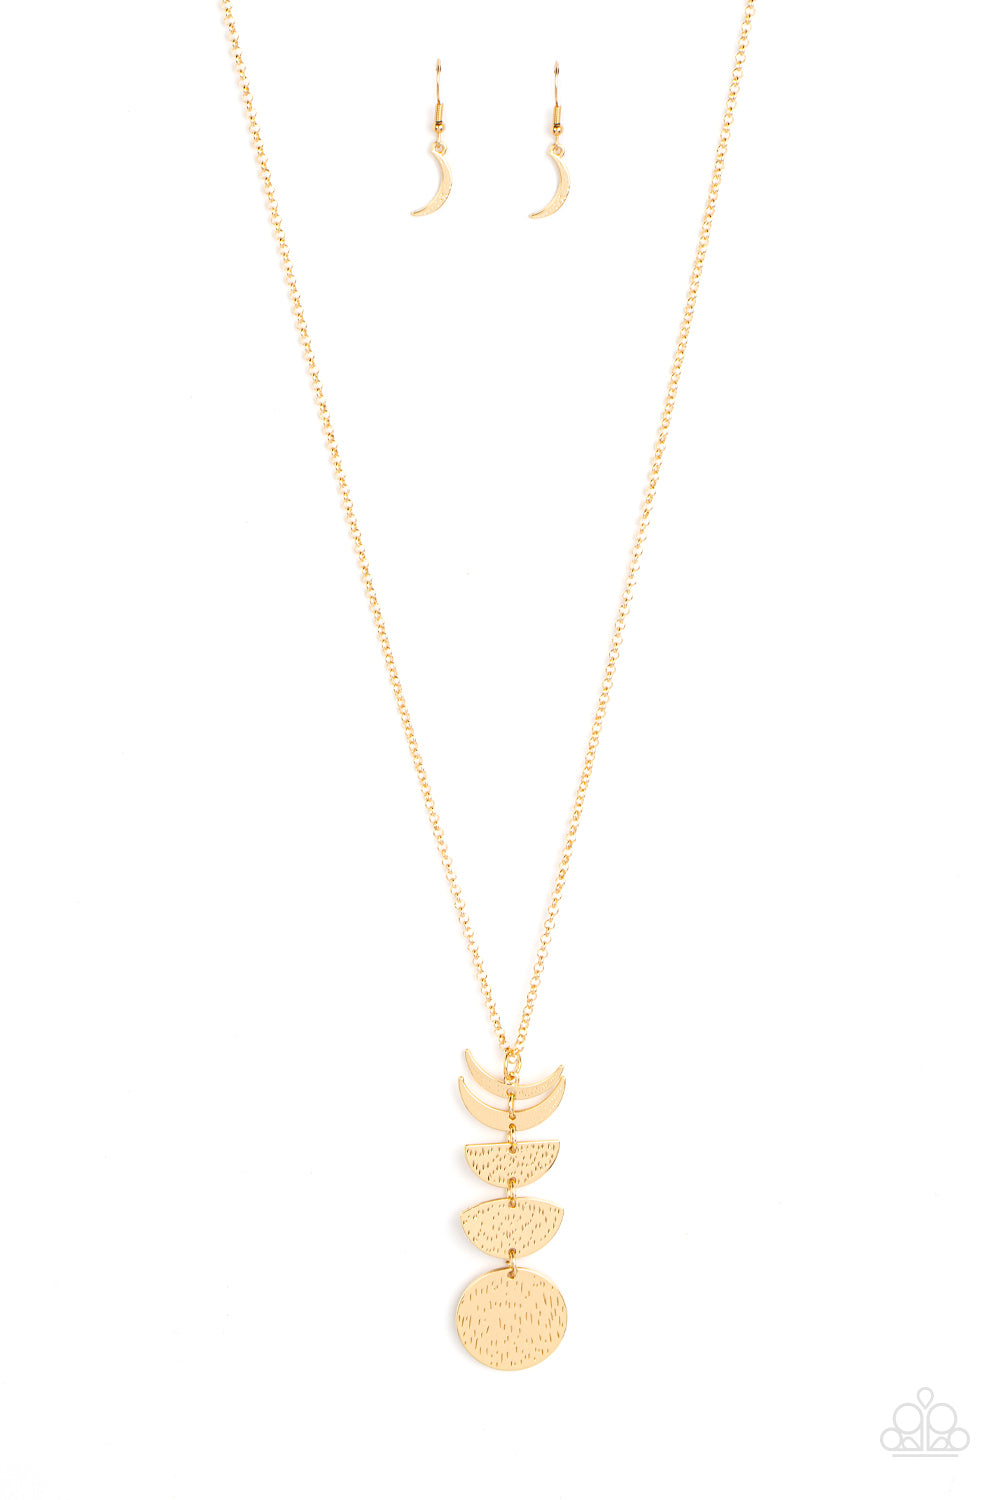 Paparazzi Necklaces - Phase Out - Gold